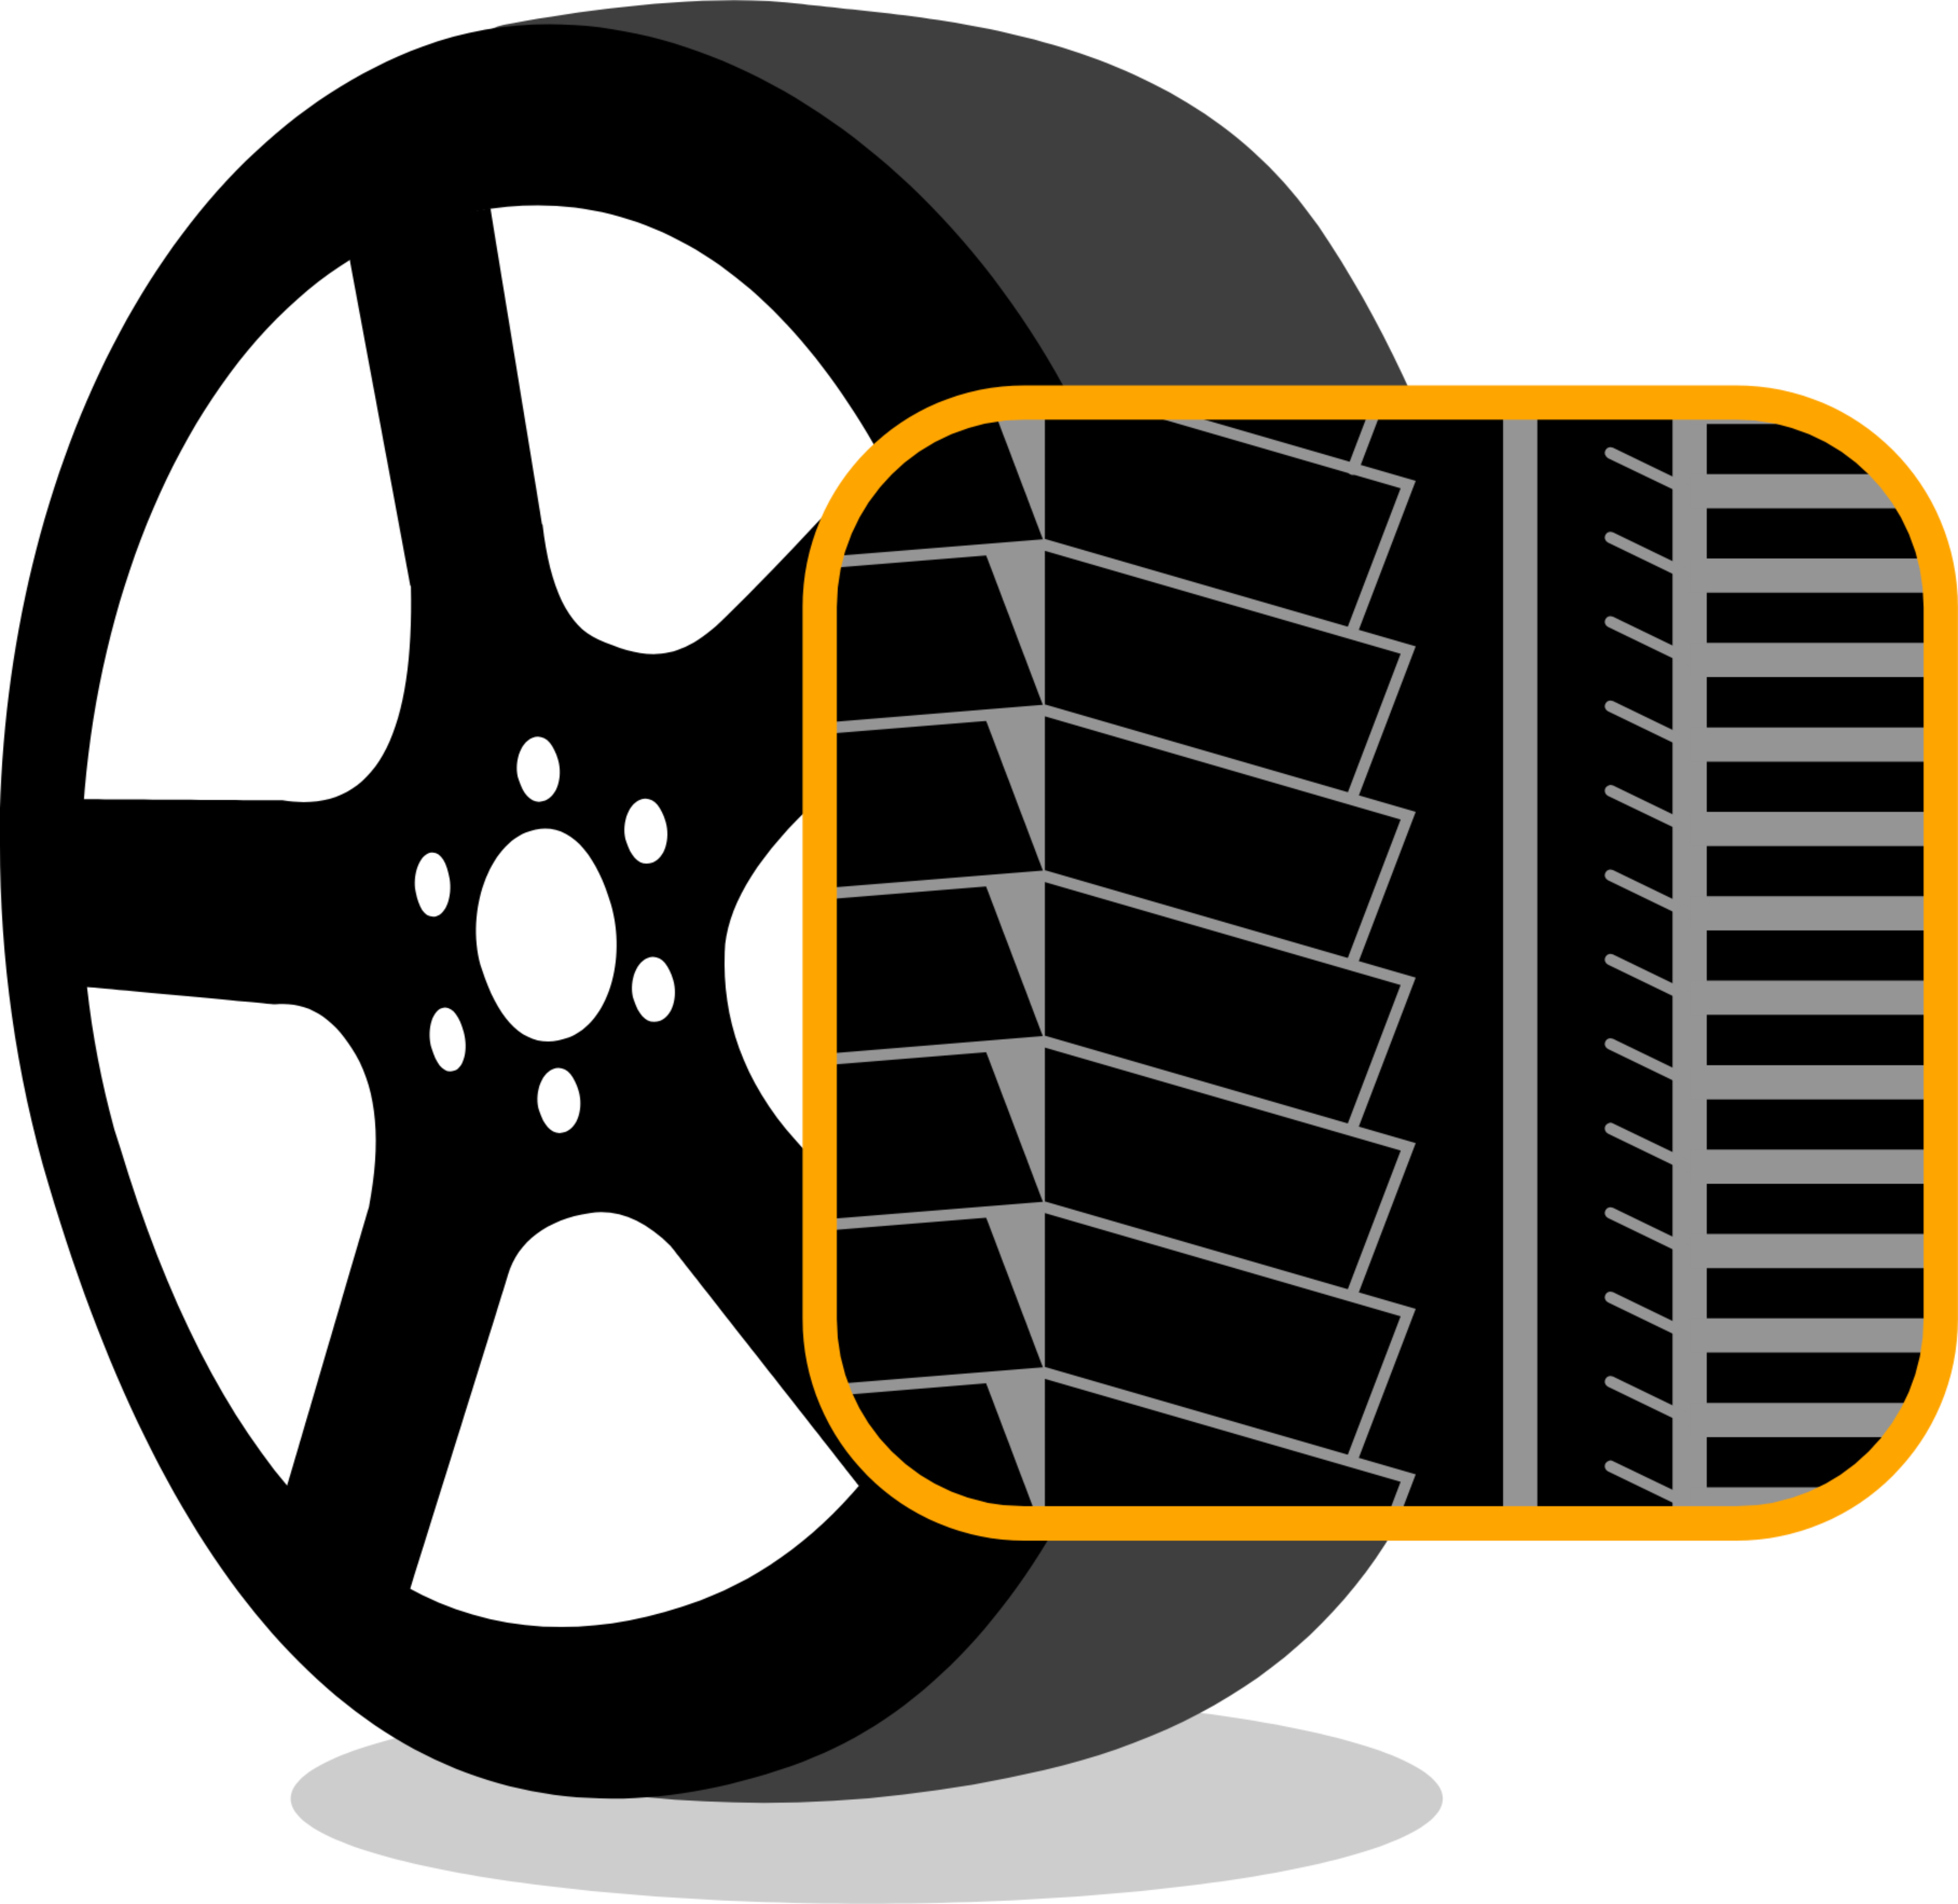 Graphic with asymmetric tire tread pattern of a car tire.